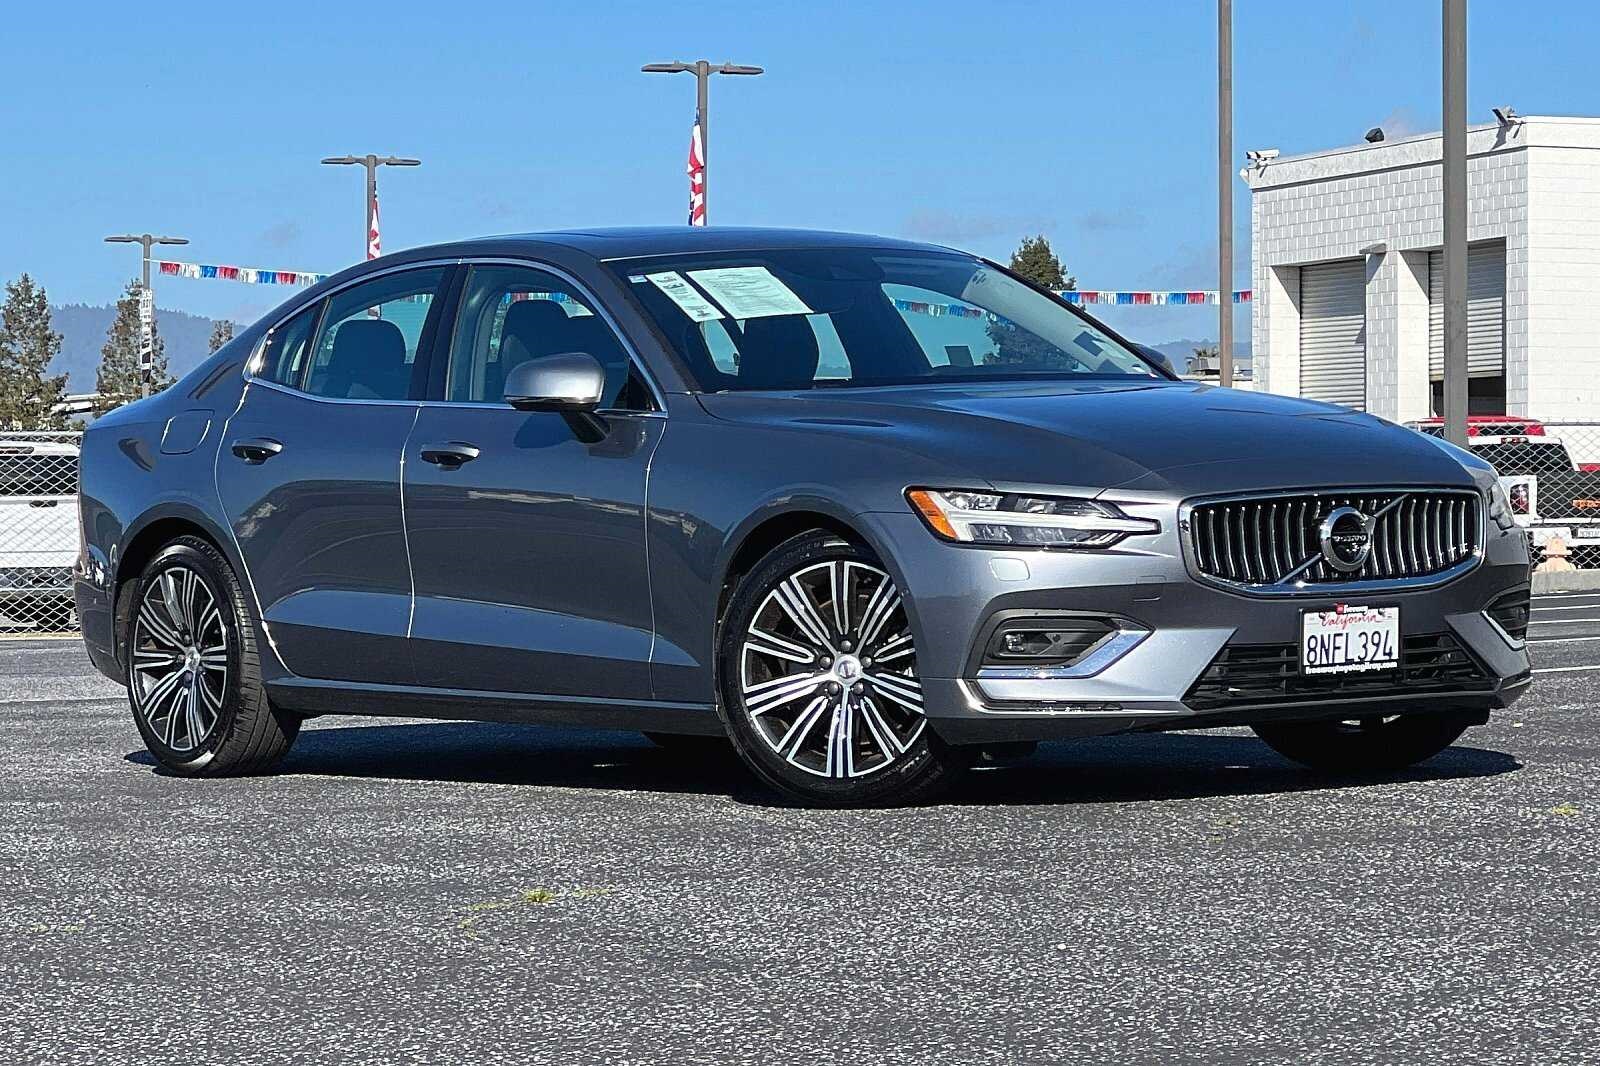 Pre-Owned 2019 Volvo S60 T6 Inscription 4D Sedan in Gilroy #72C03523 |  Freeway Toyota of Gilroy